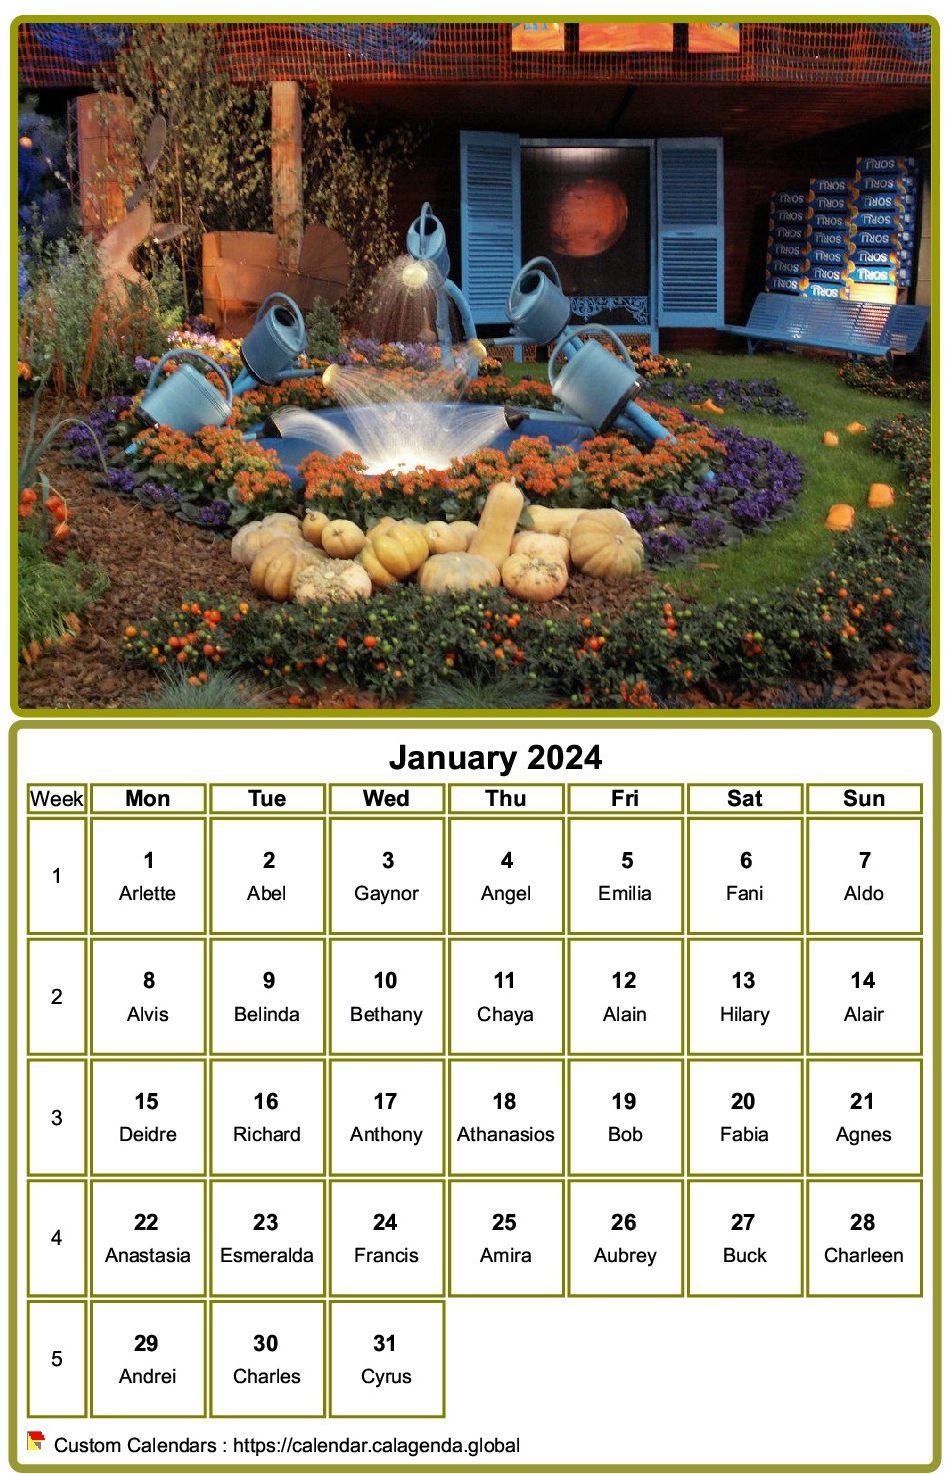 Calendar 2024 to print, monthly, with photo at the top